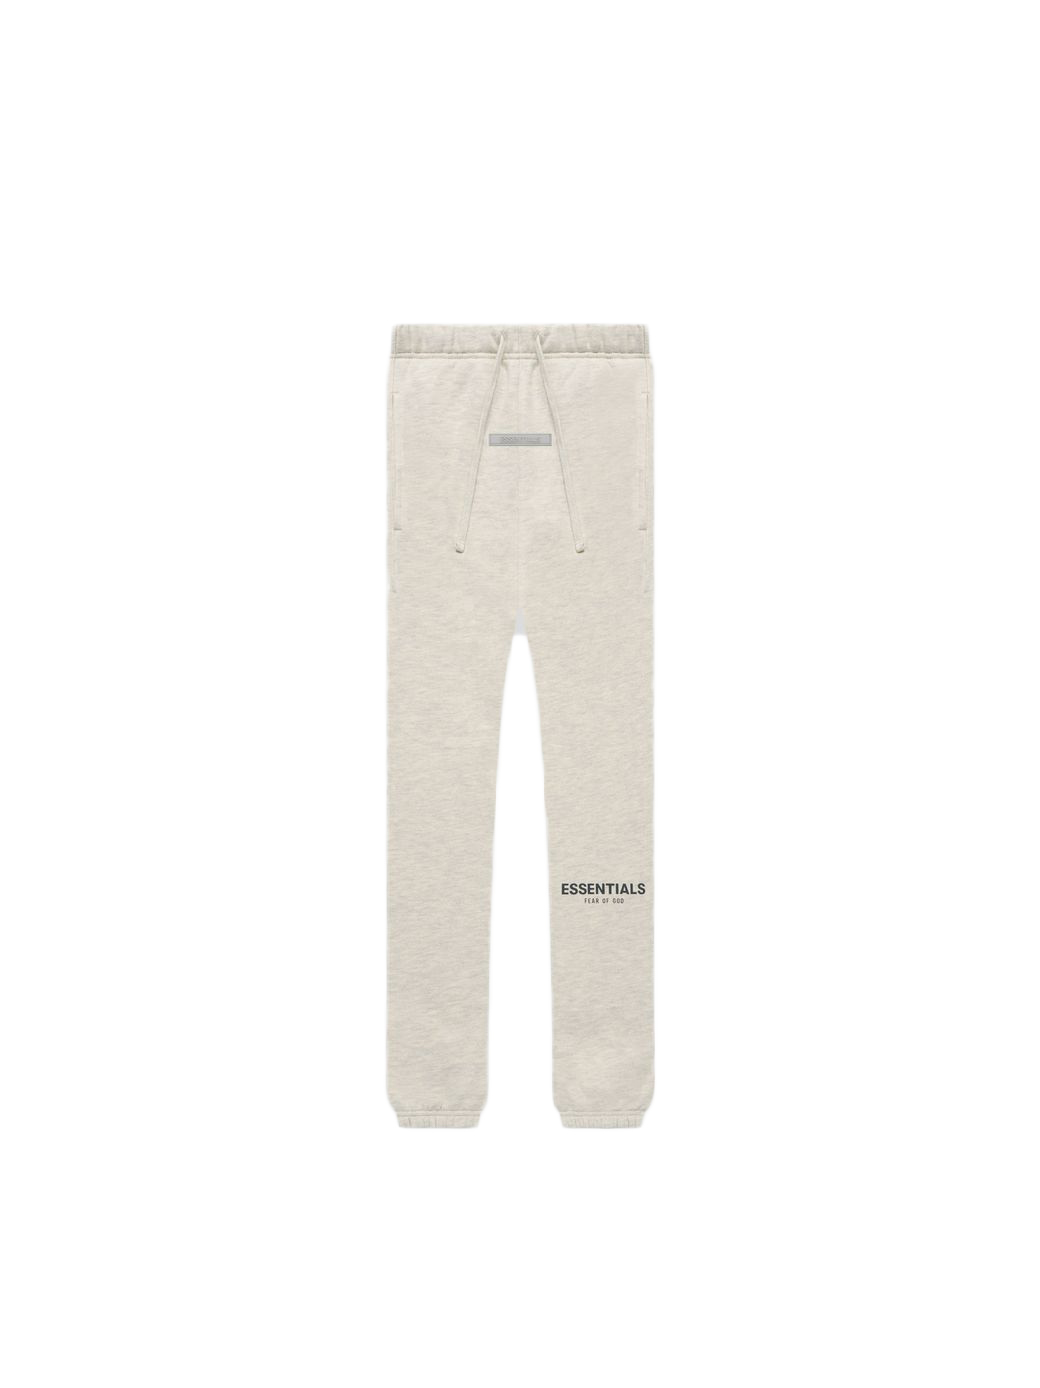 Fear of God Essentials Core Collection Sweatpant Dark Heather